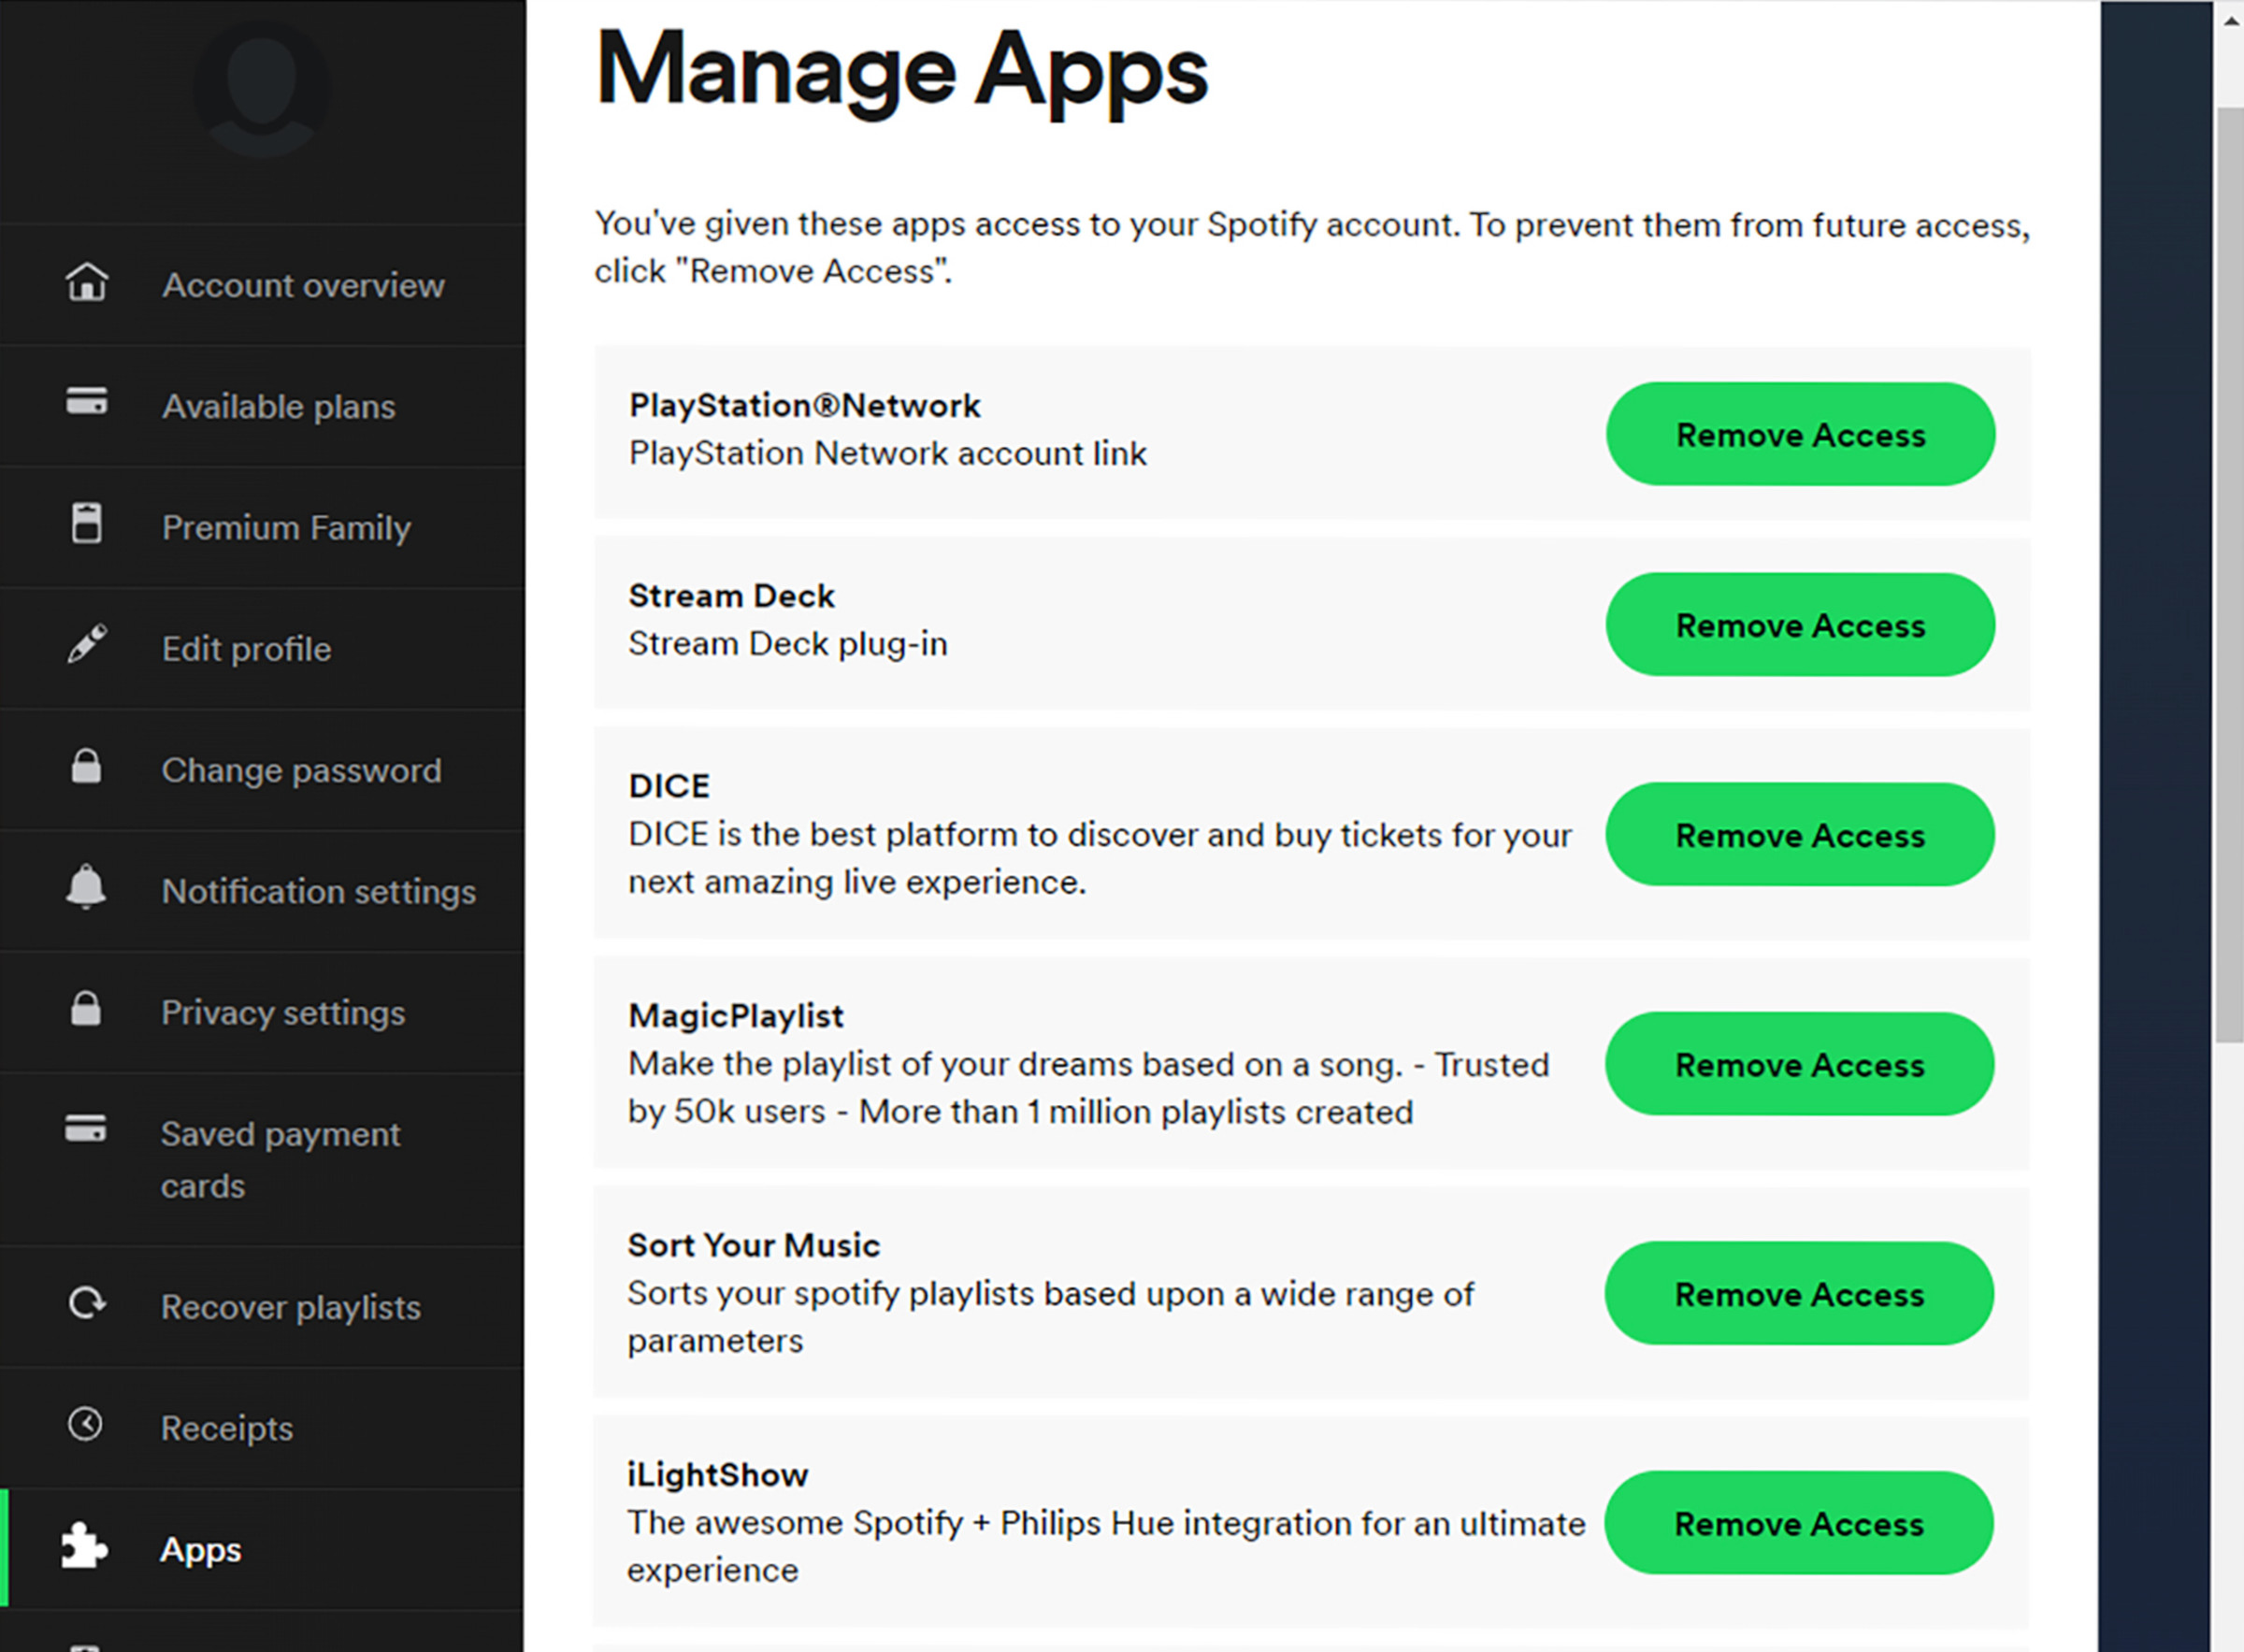 Spotify page with Manage Apps on top, a menu on the left side, and a list of apps down the center with a green Remove Access button next to each.